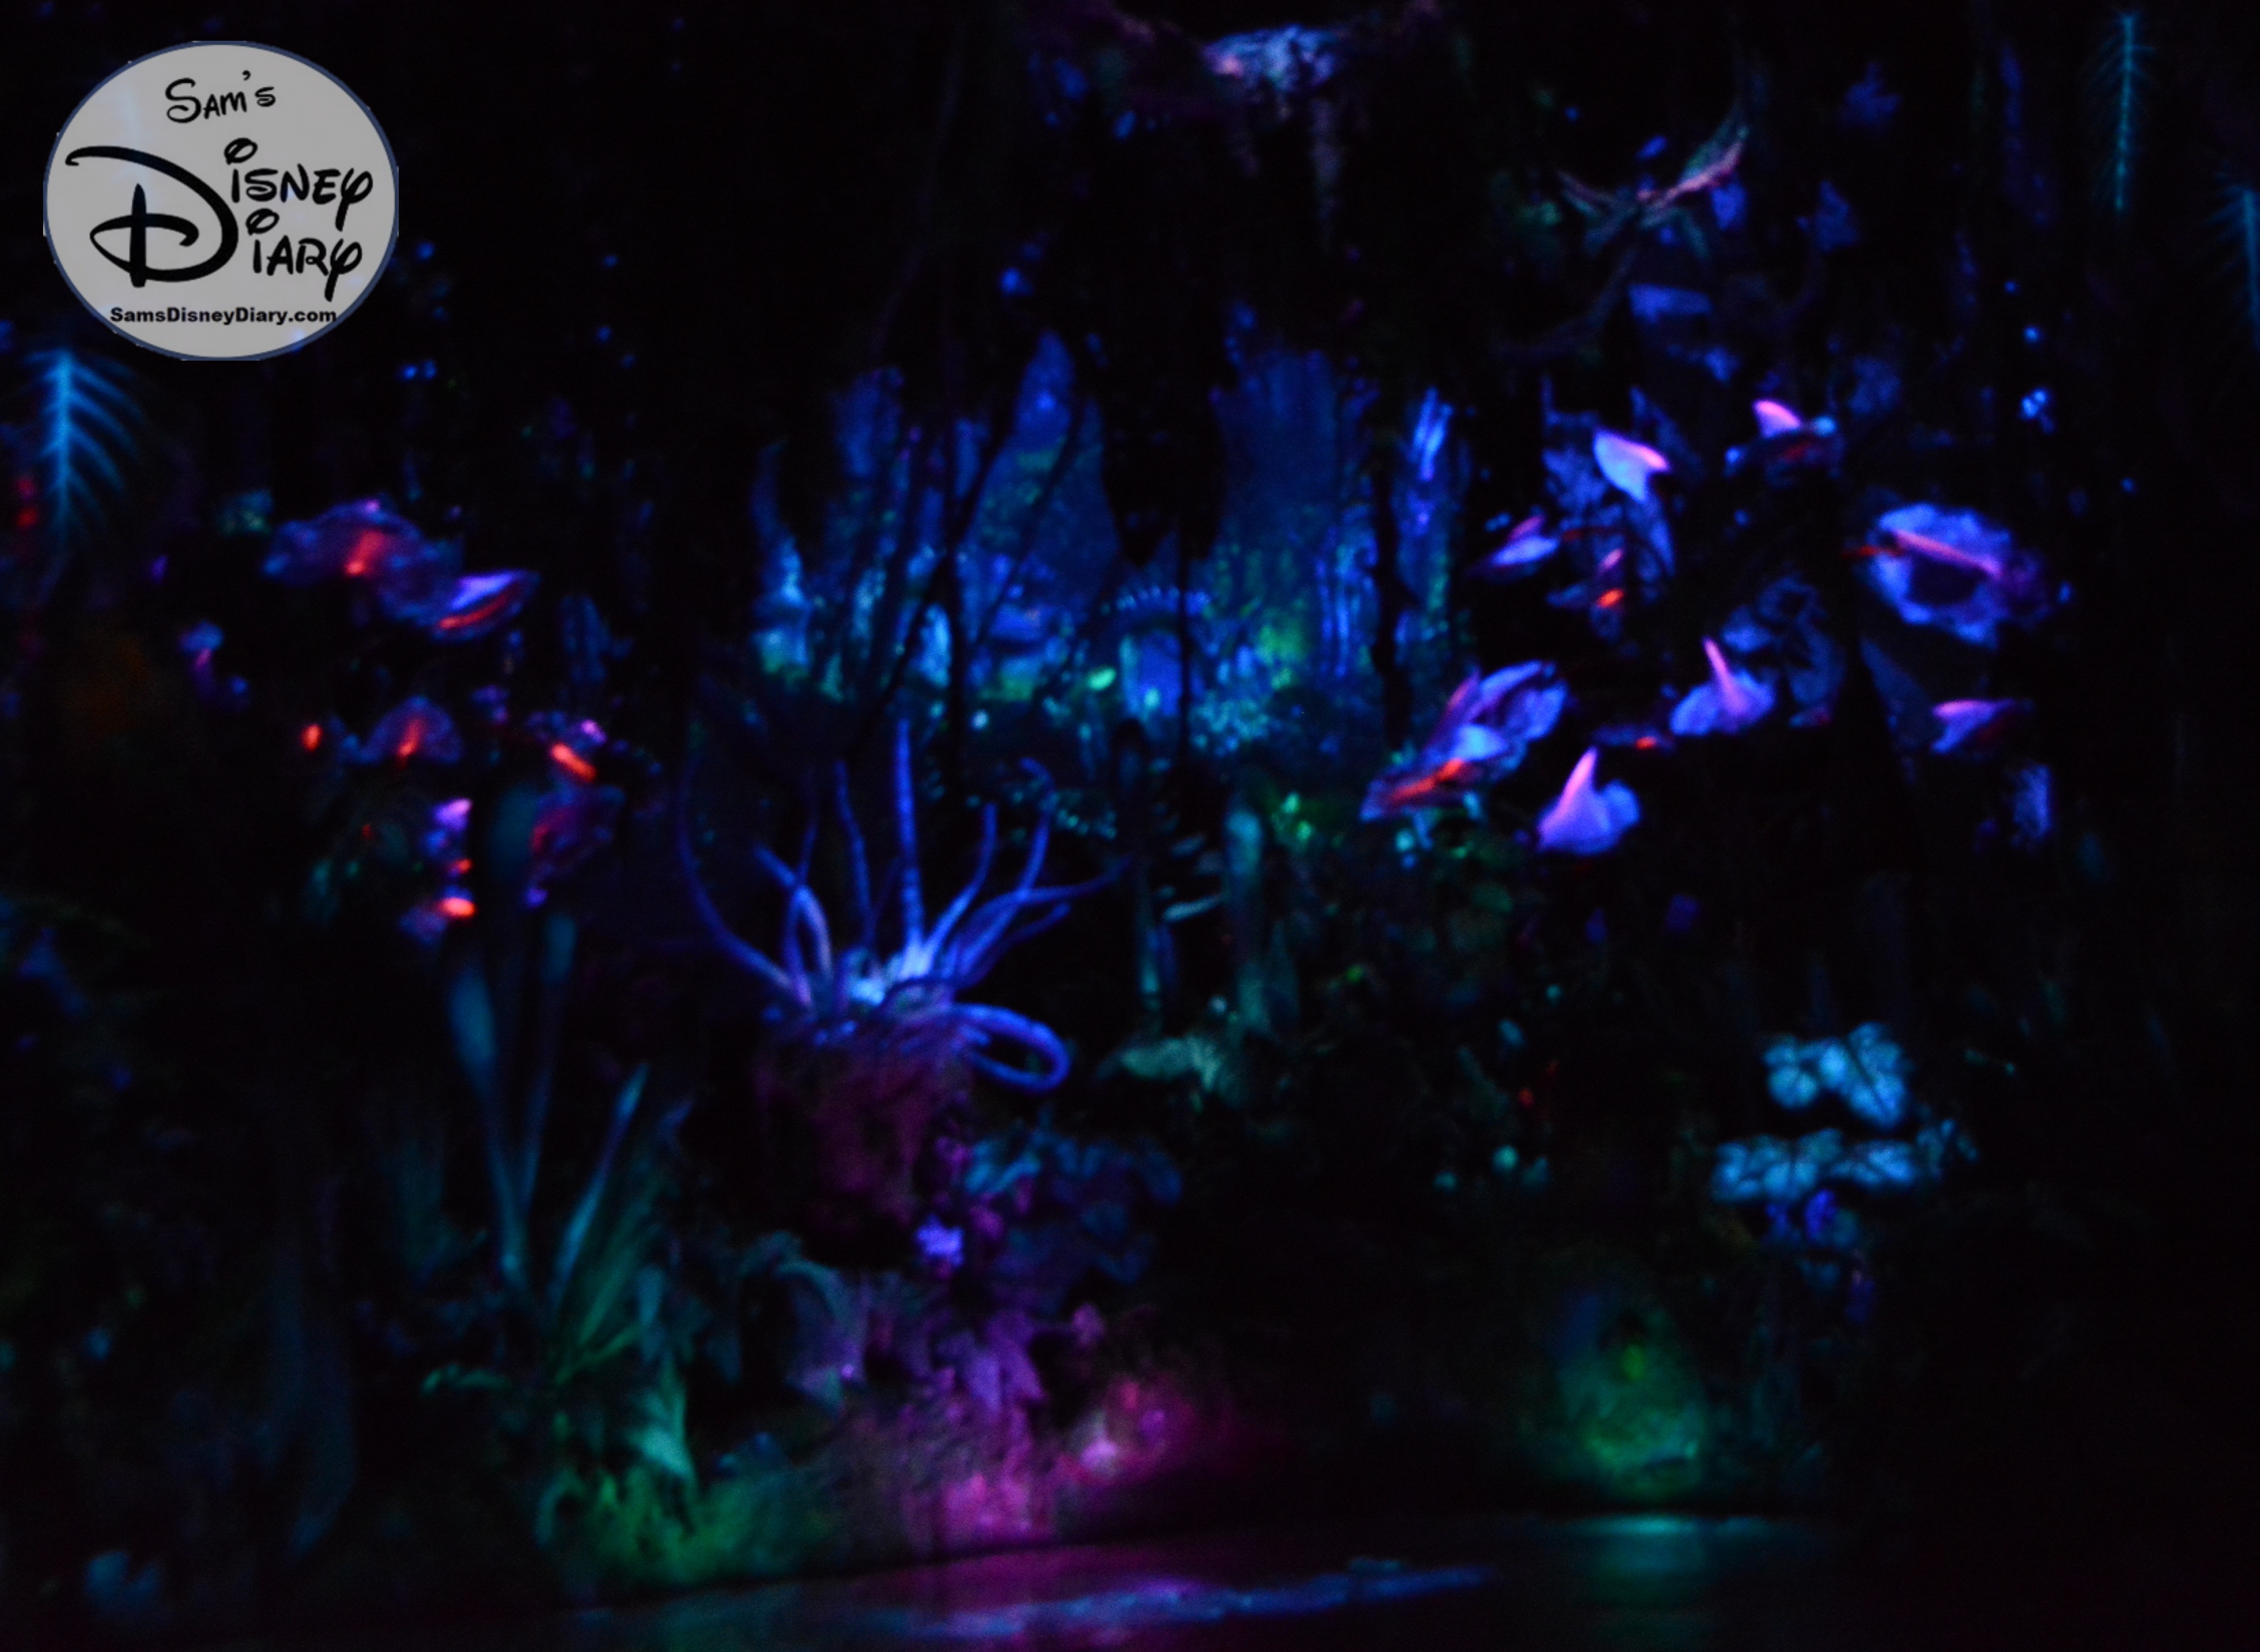 The Bioluminescent rainforest grows even more interesting as we journey deeper into the Na'vi River.